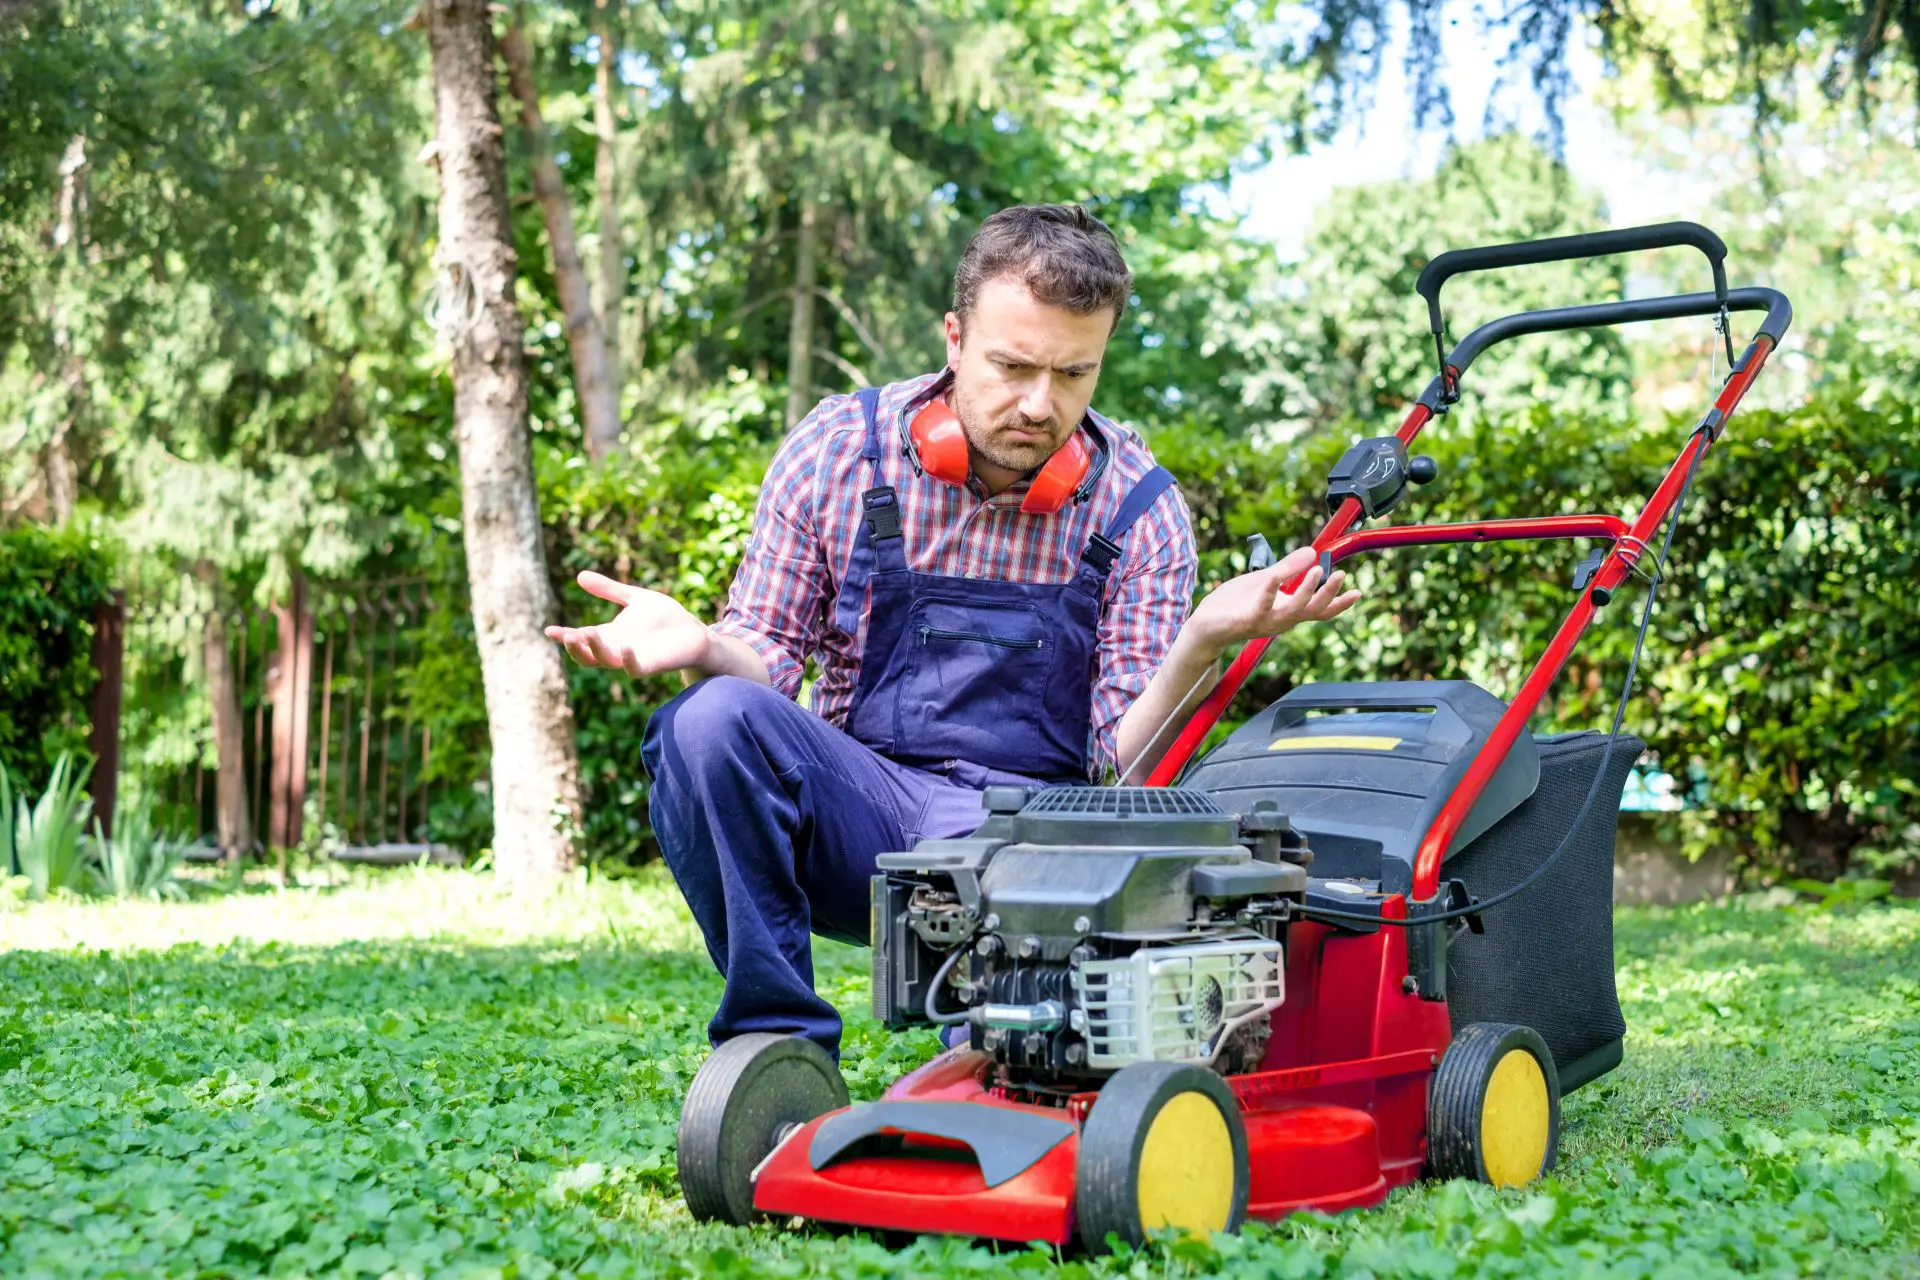 lawnmower having problem - Starting a Lawnmower That Won't Start After Sitting - Patricia